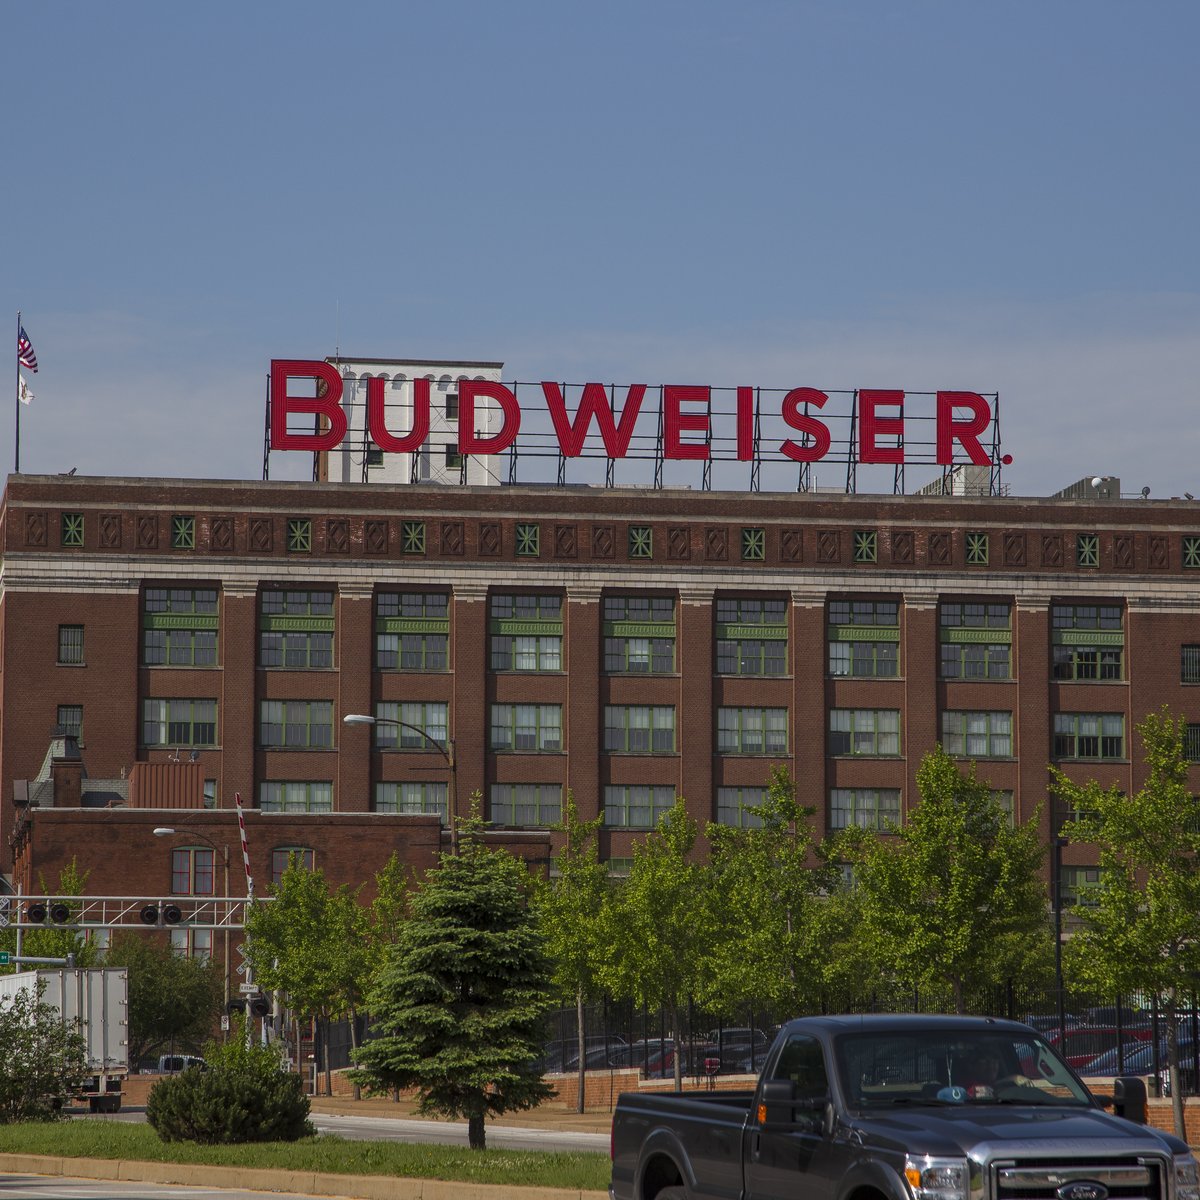 Anheuser-Busch to produce Stella Artois in St. Louis as part of $1B  investment - St. Louis Business Journal